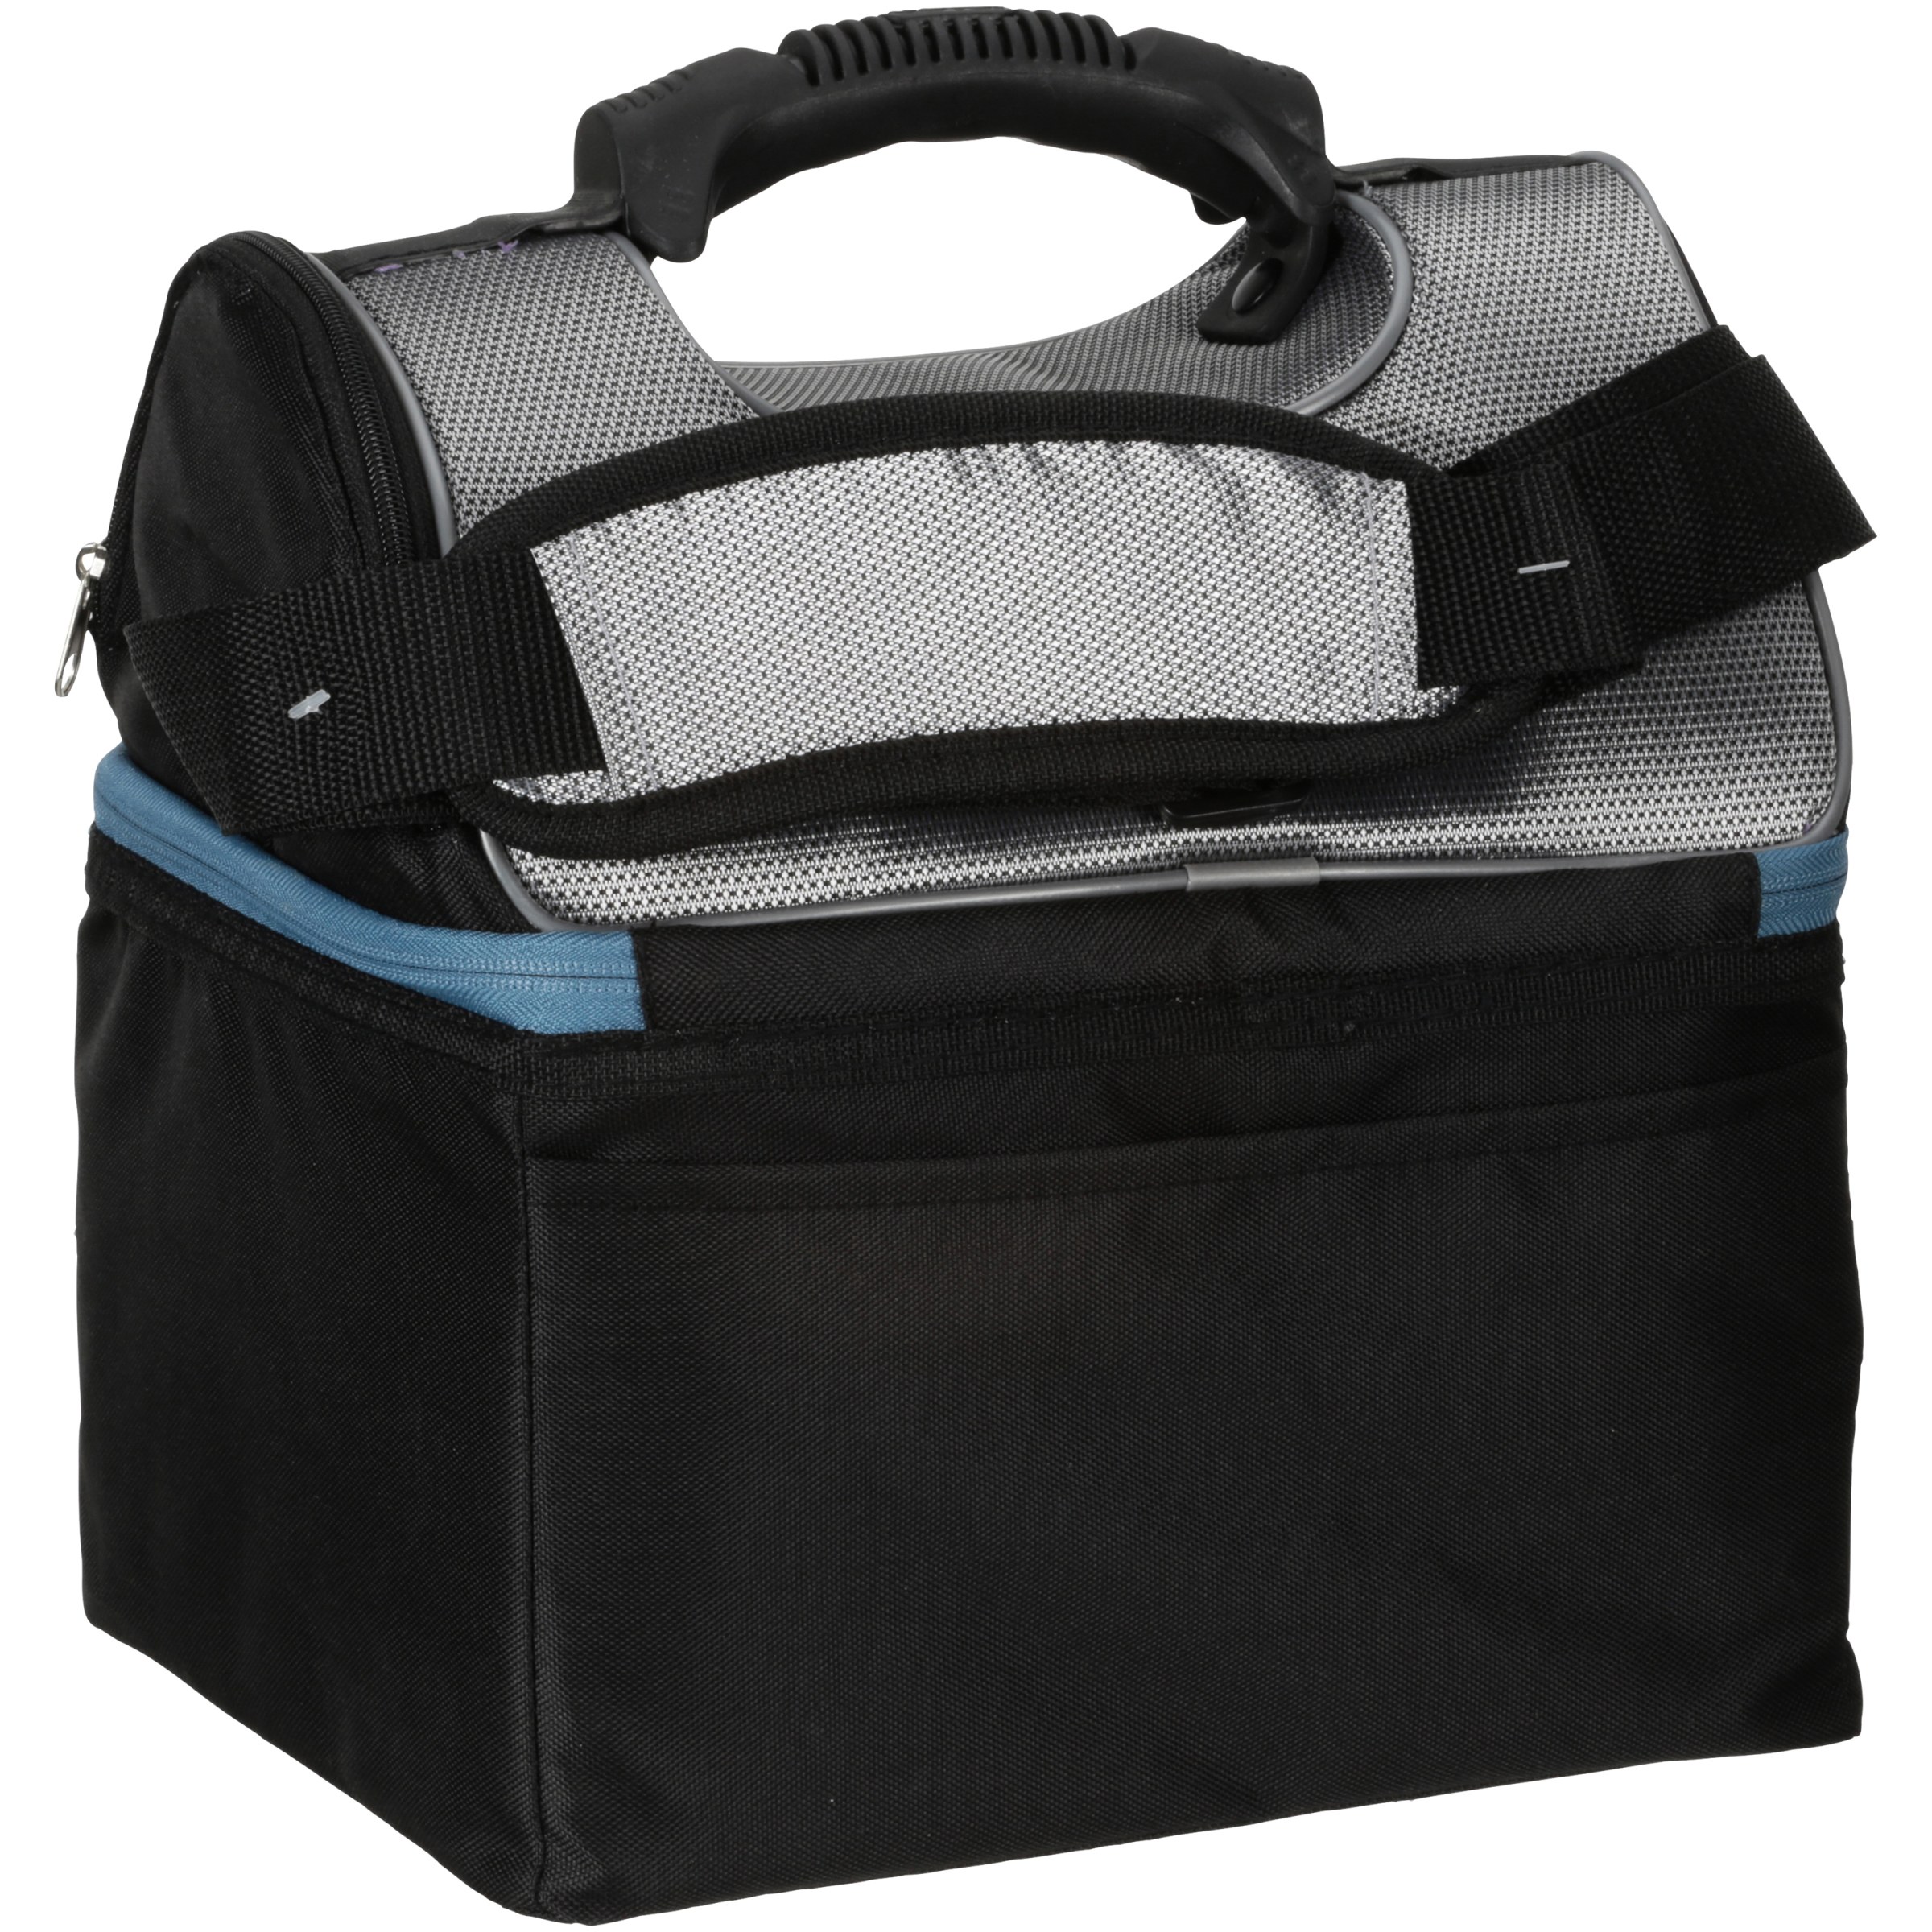 Igloo MaxCold Gripper 16-Qt Lunch Box, Black - image 3 of 4